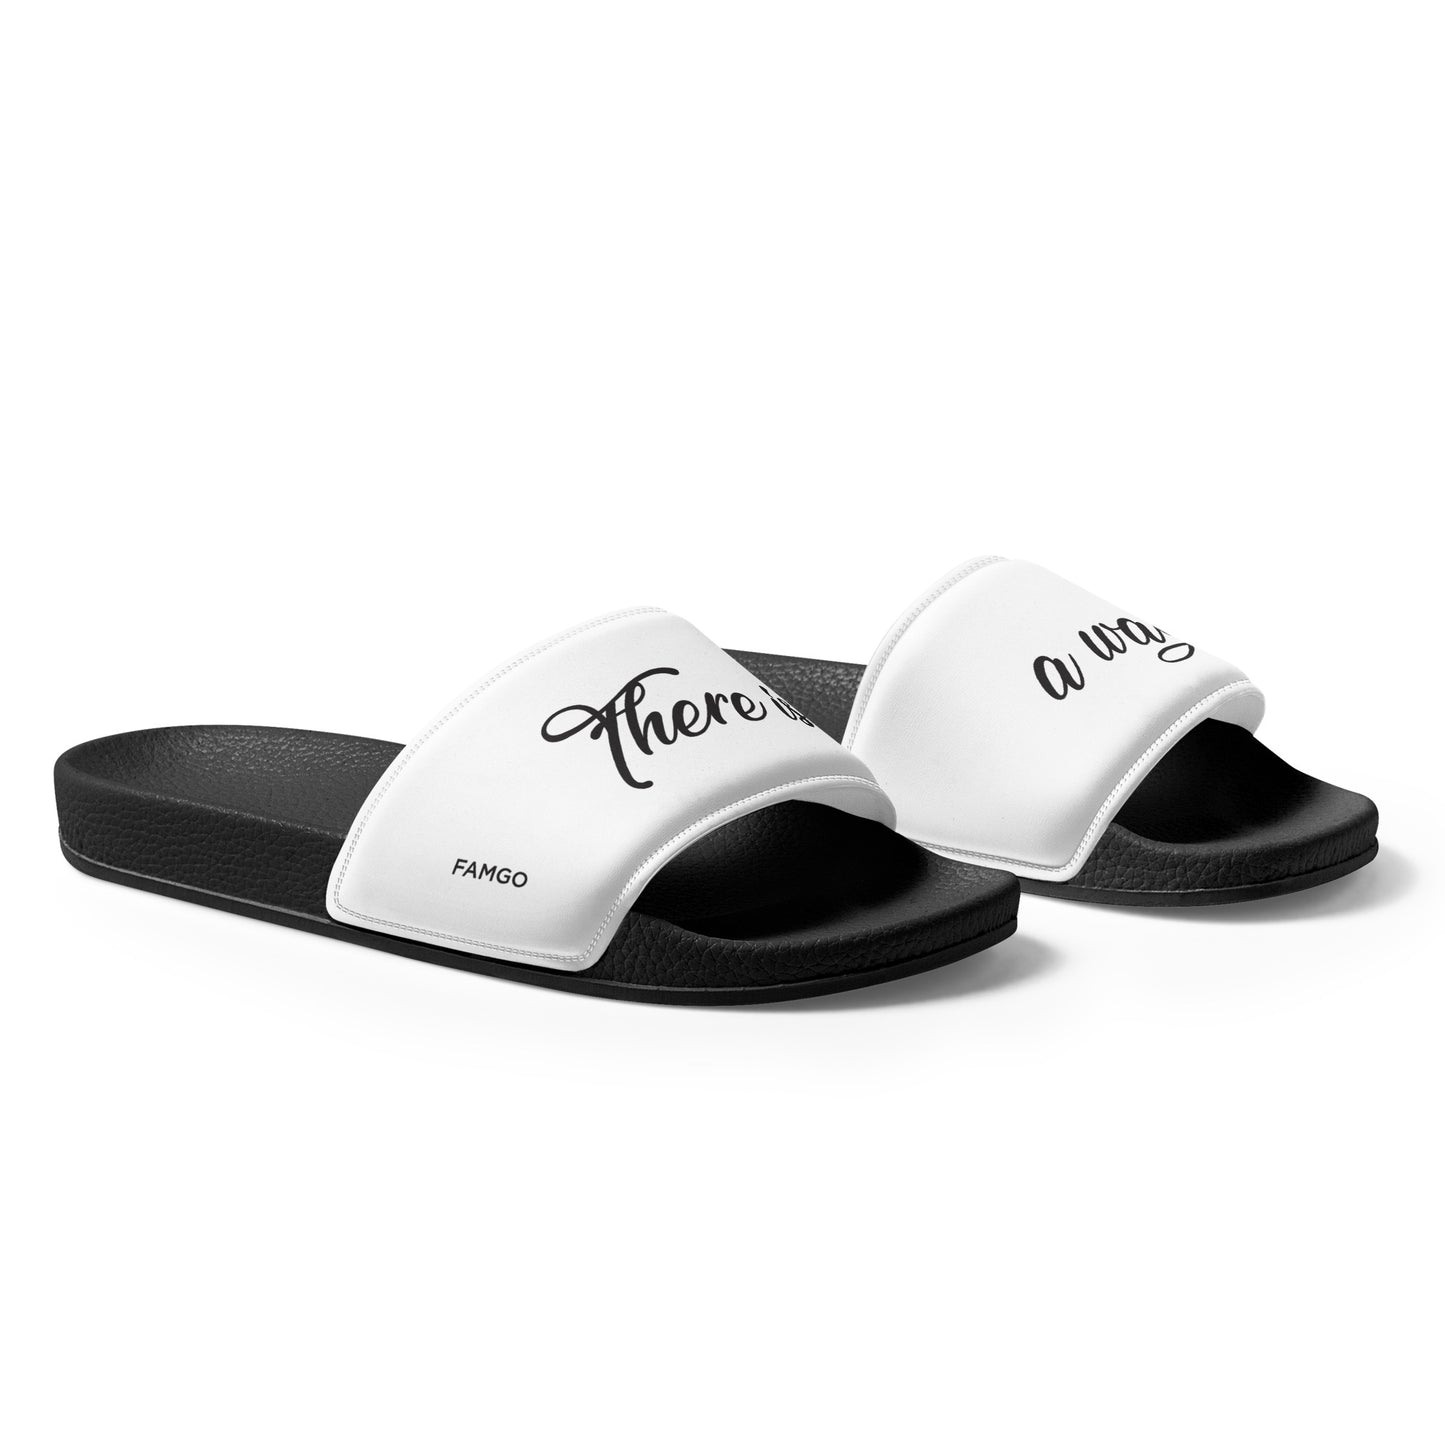 There Is A Way Men's Minimalist Slide Sandals